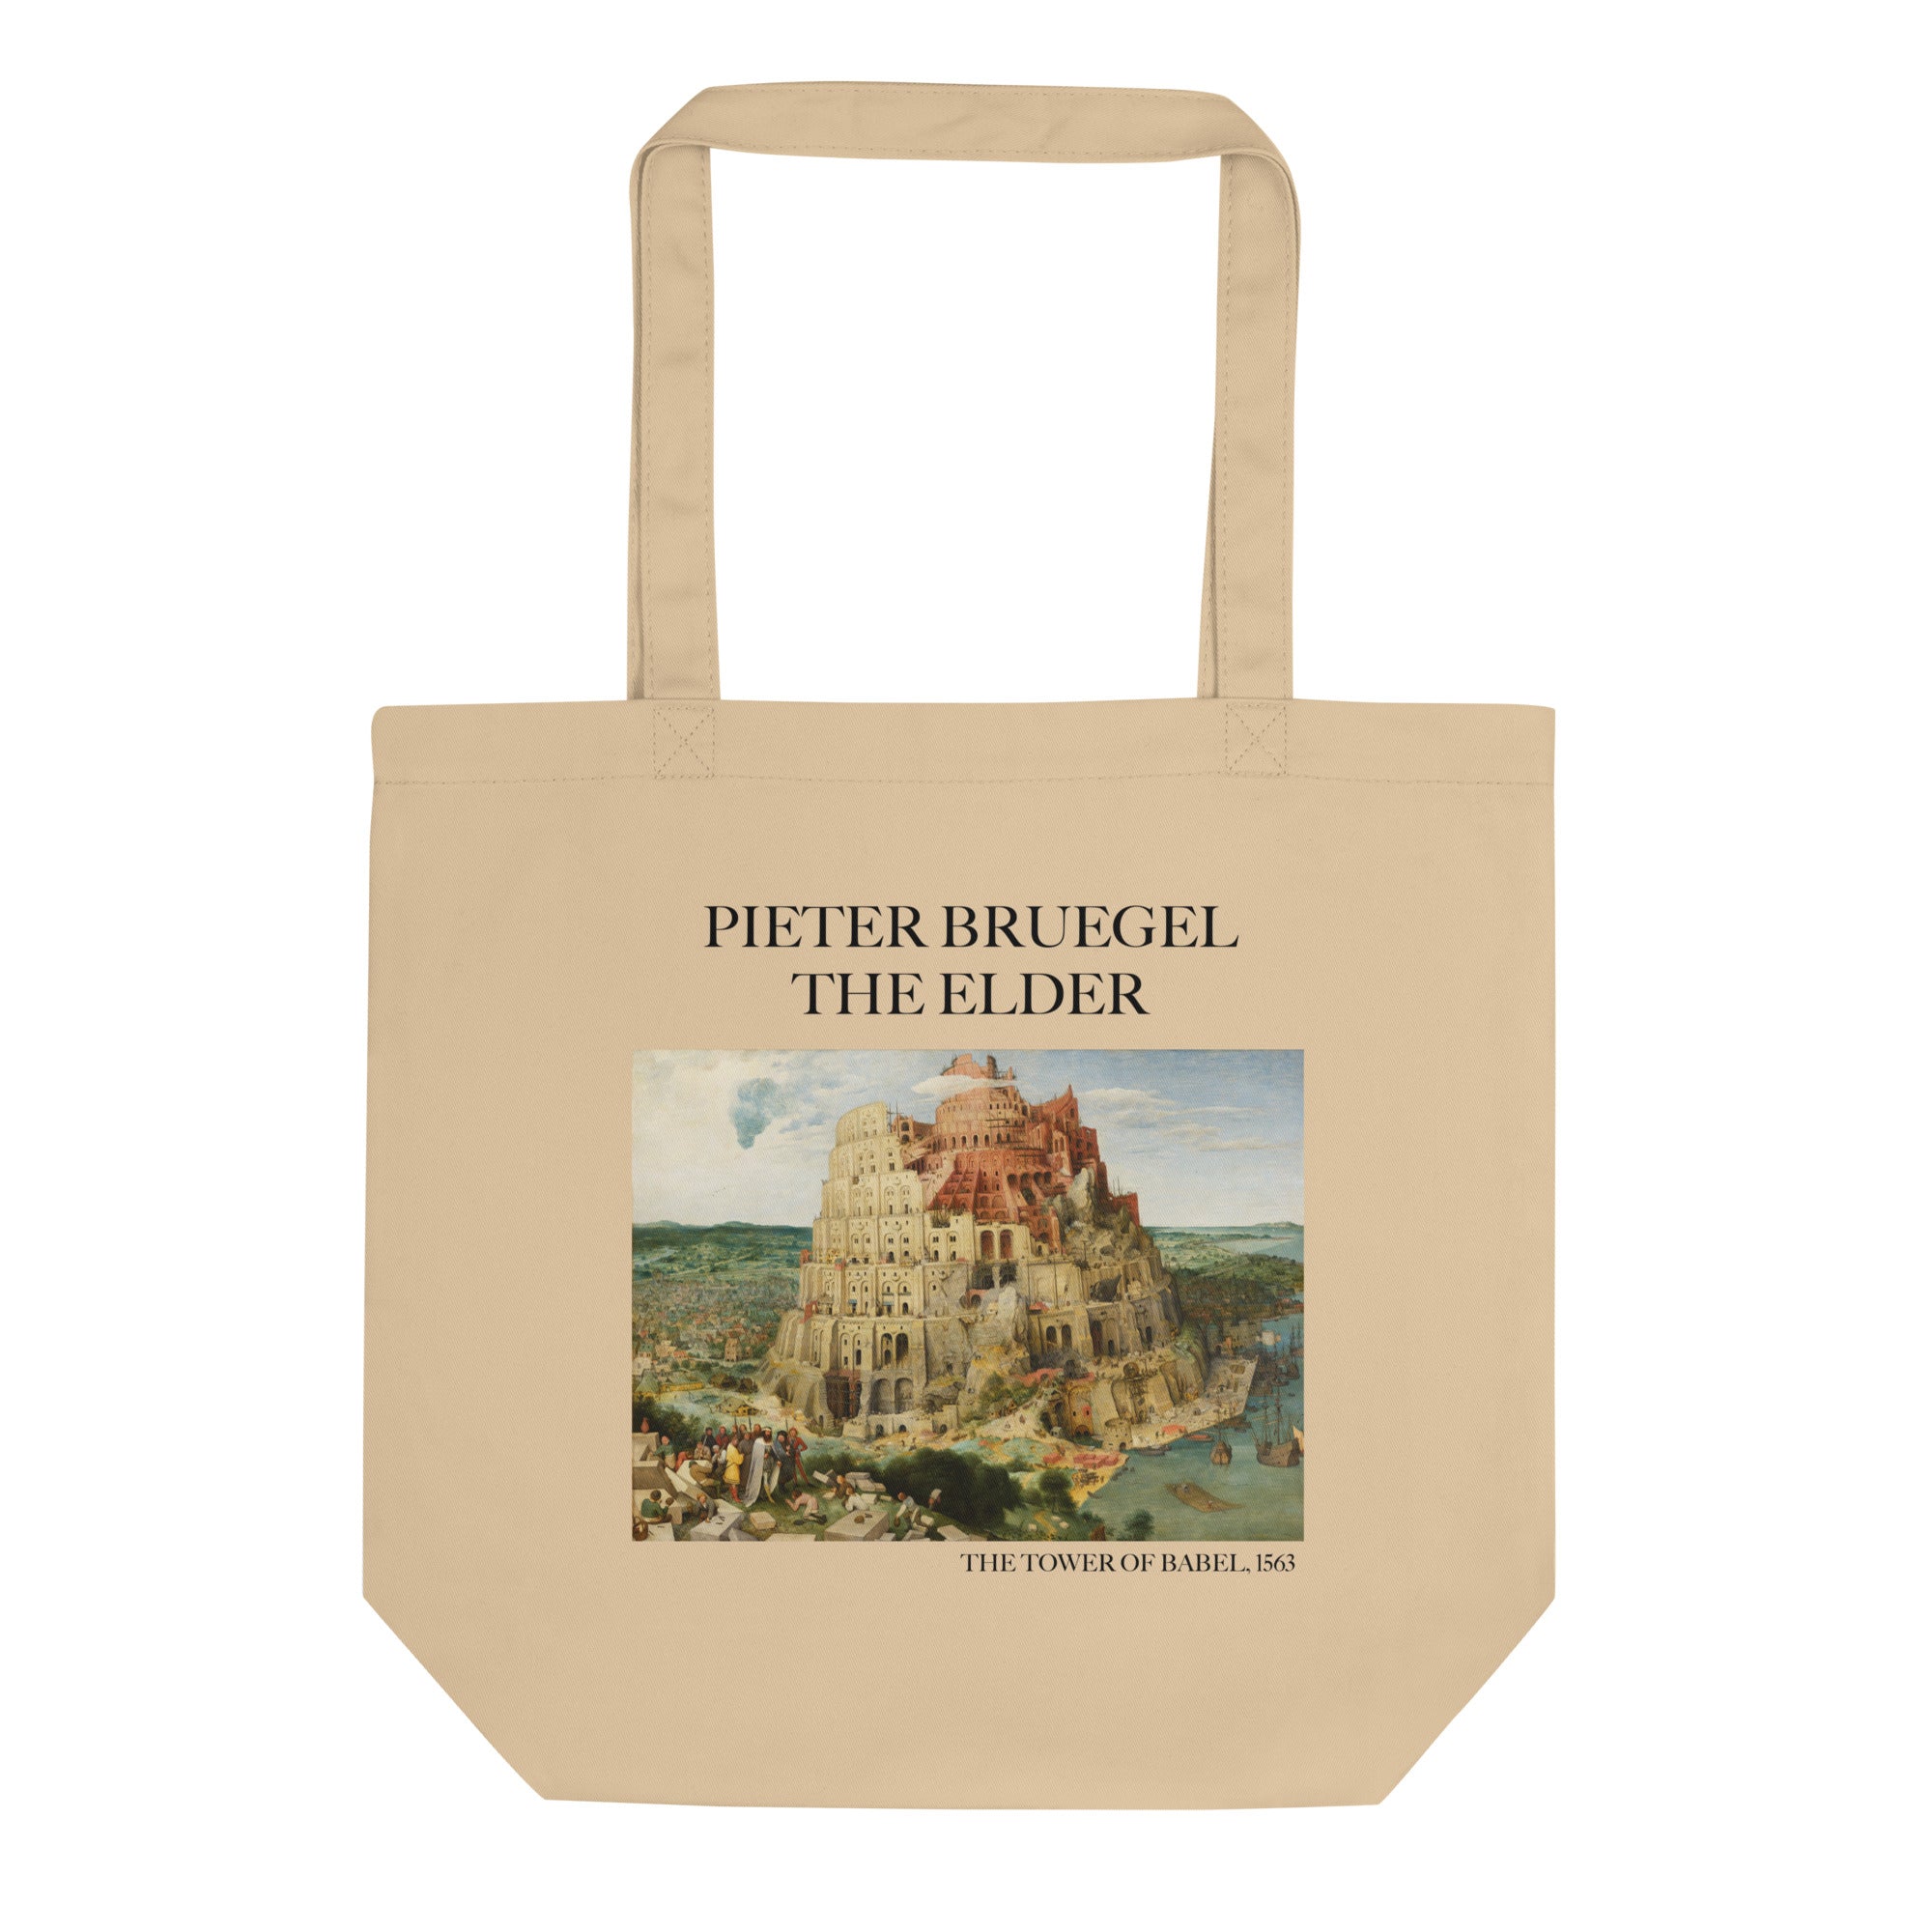 Pieter Bruegel the Elder 'The Tower of Babel' Famous Painting Totebag | Eco Friendly Art Tote Bag